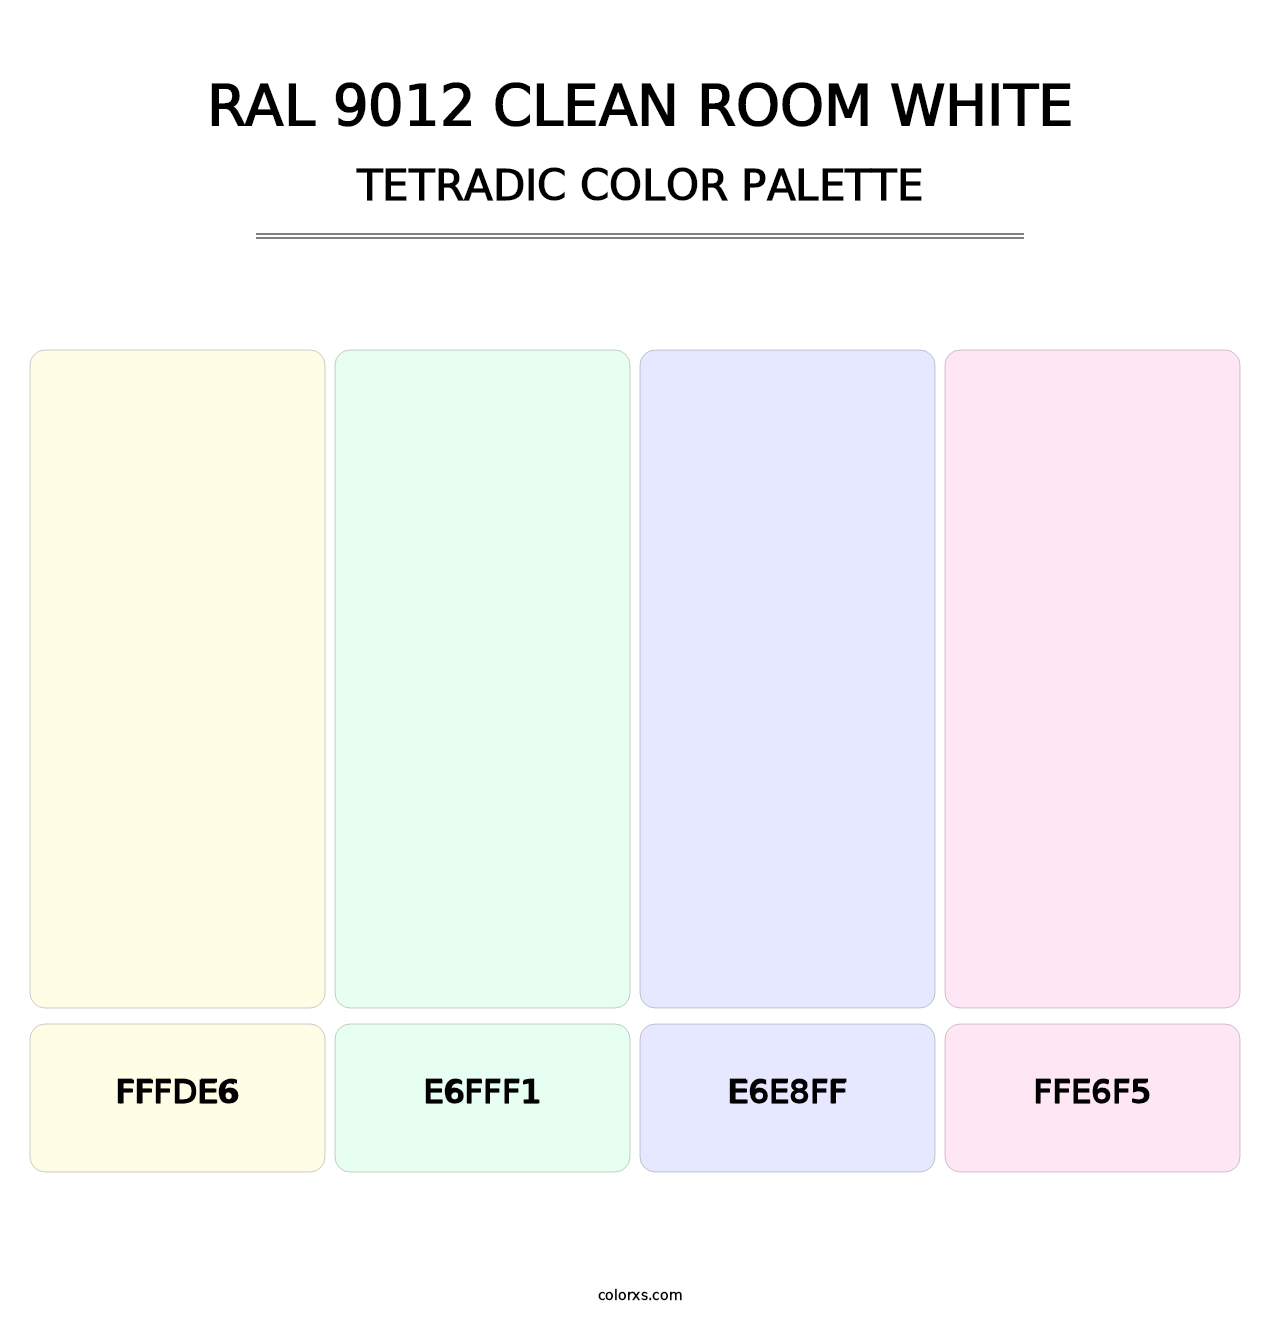 RAL 9012 Clean Room White - Tetradic Color Palette